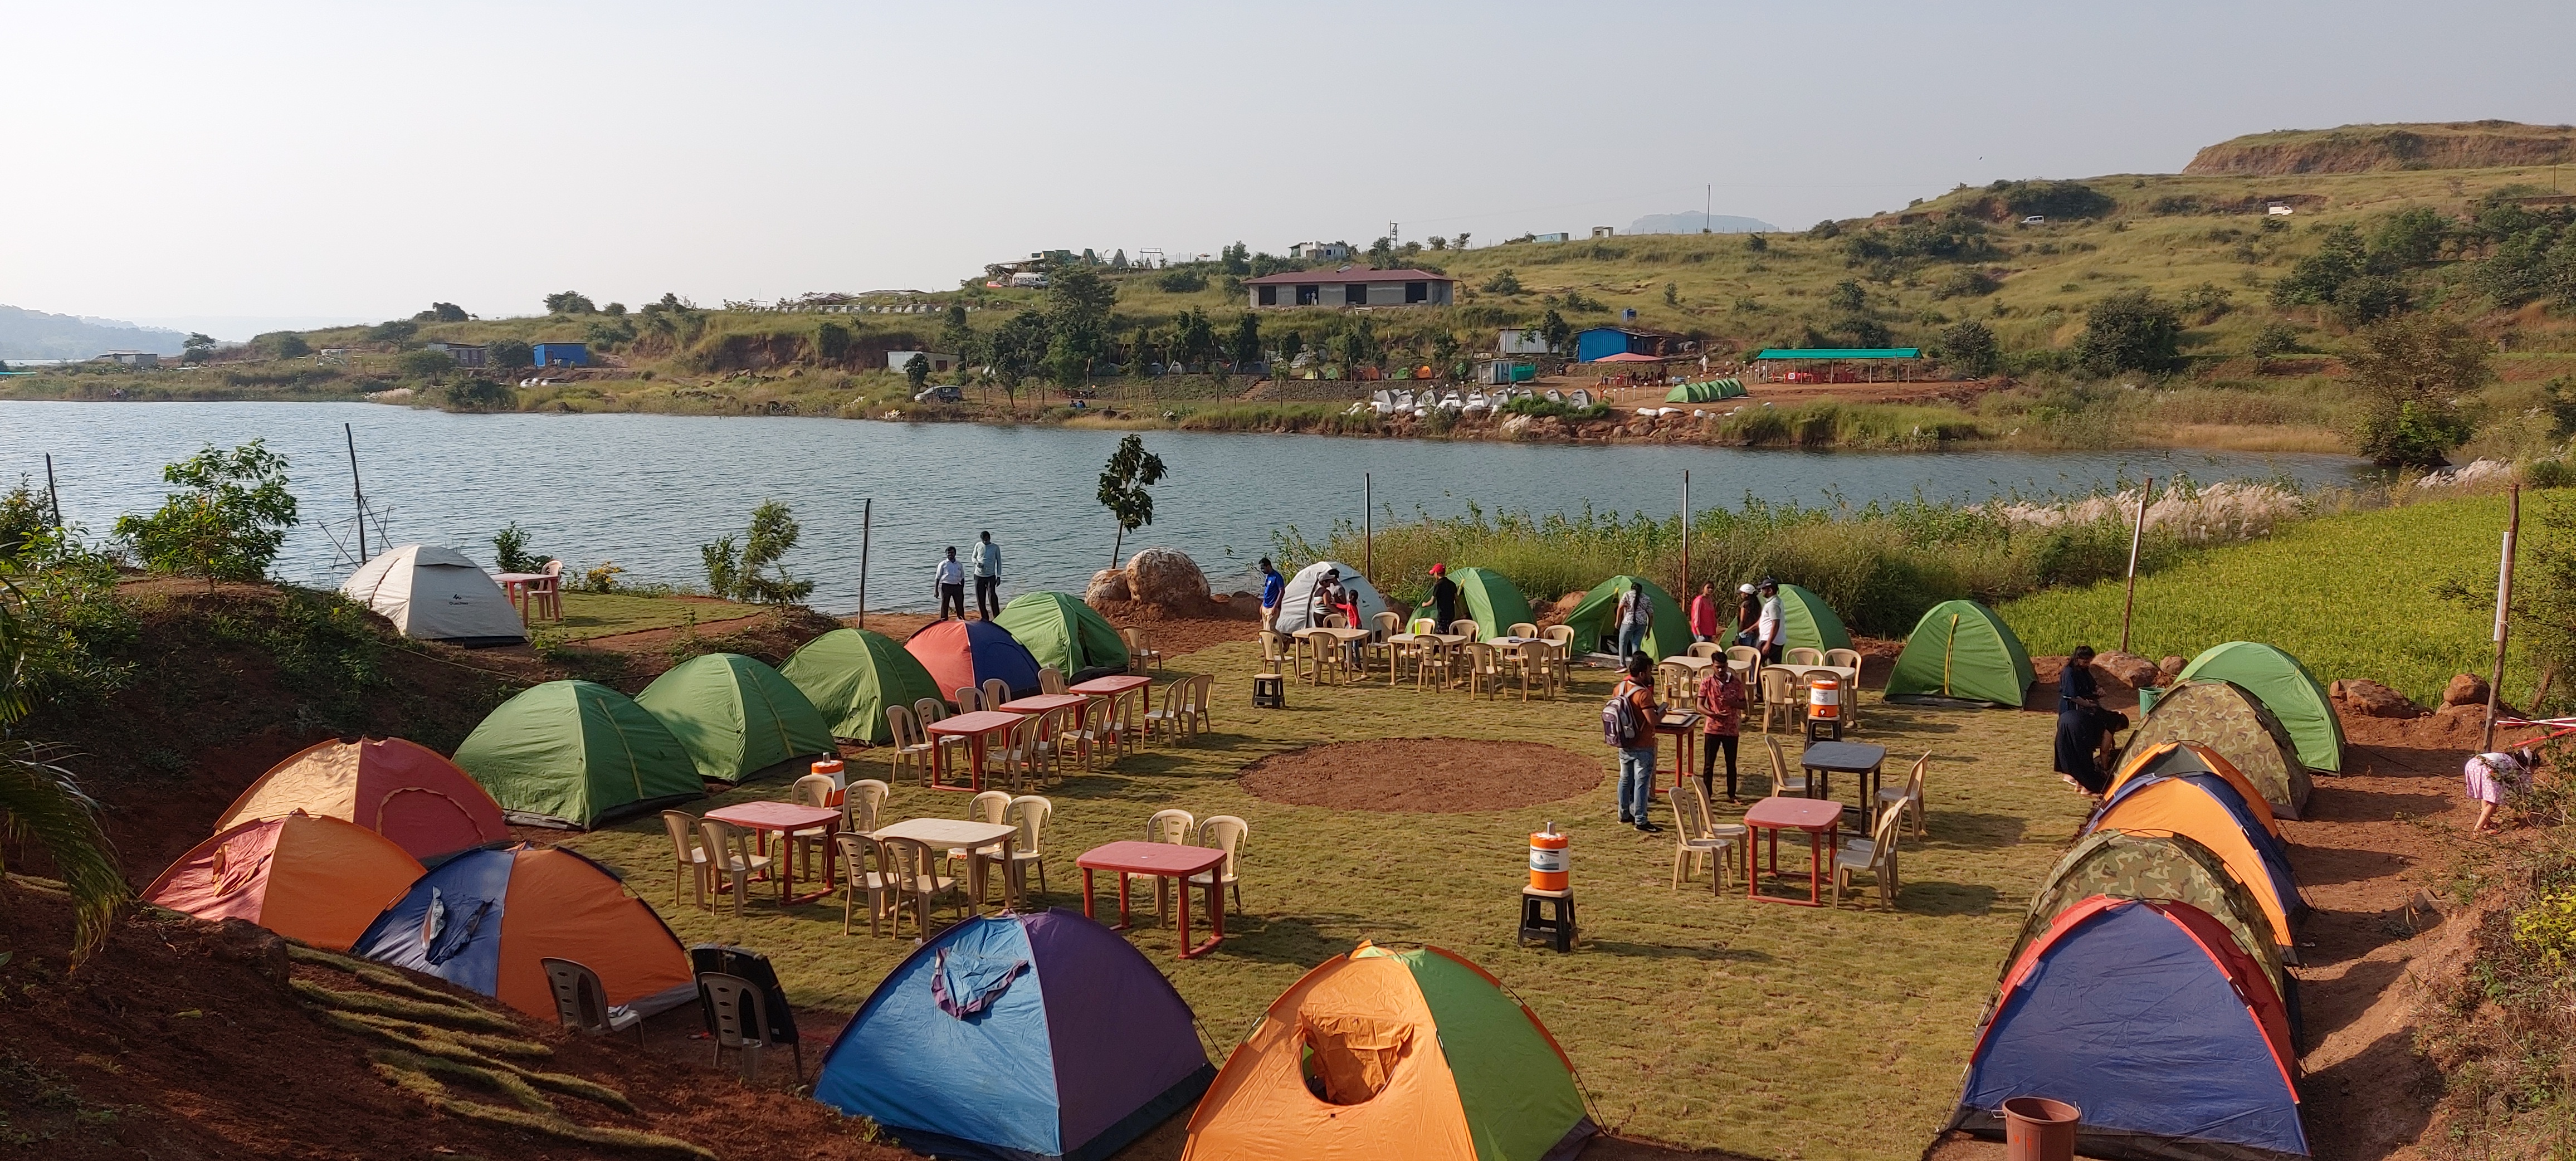 Tent stay near pune